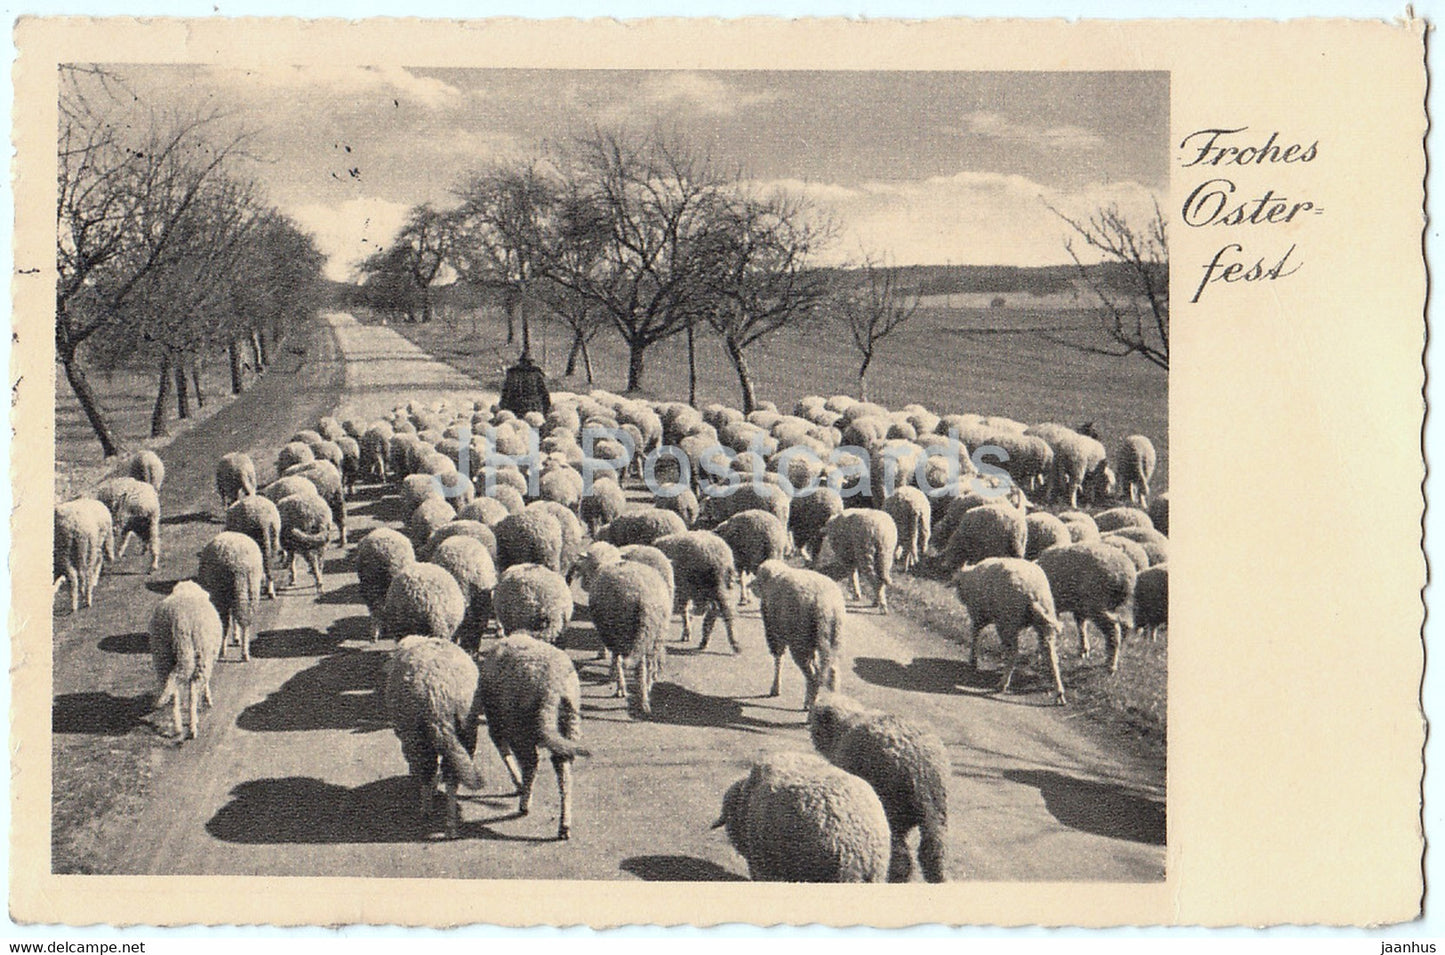 Easter Greeting Card - Frohes Osterfest - sheep - Feldpost - old postcard - 1941 - Germany - used - JH Postcards